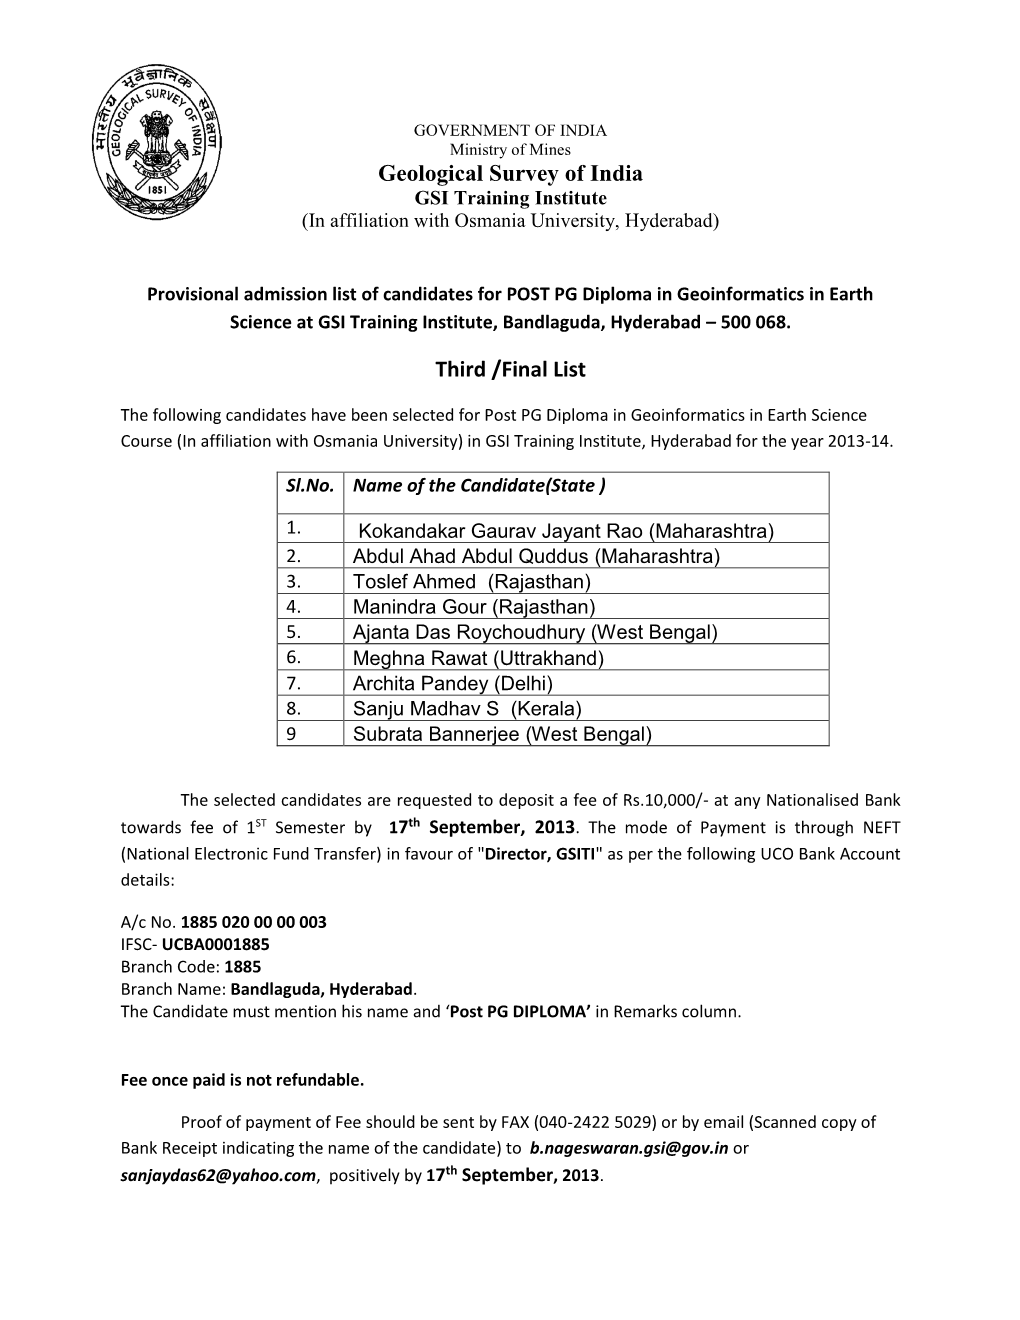 Geological Survey of India GSI Training Institute (In Affiliation with Osmania University, Hyderabad)